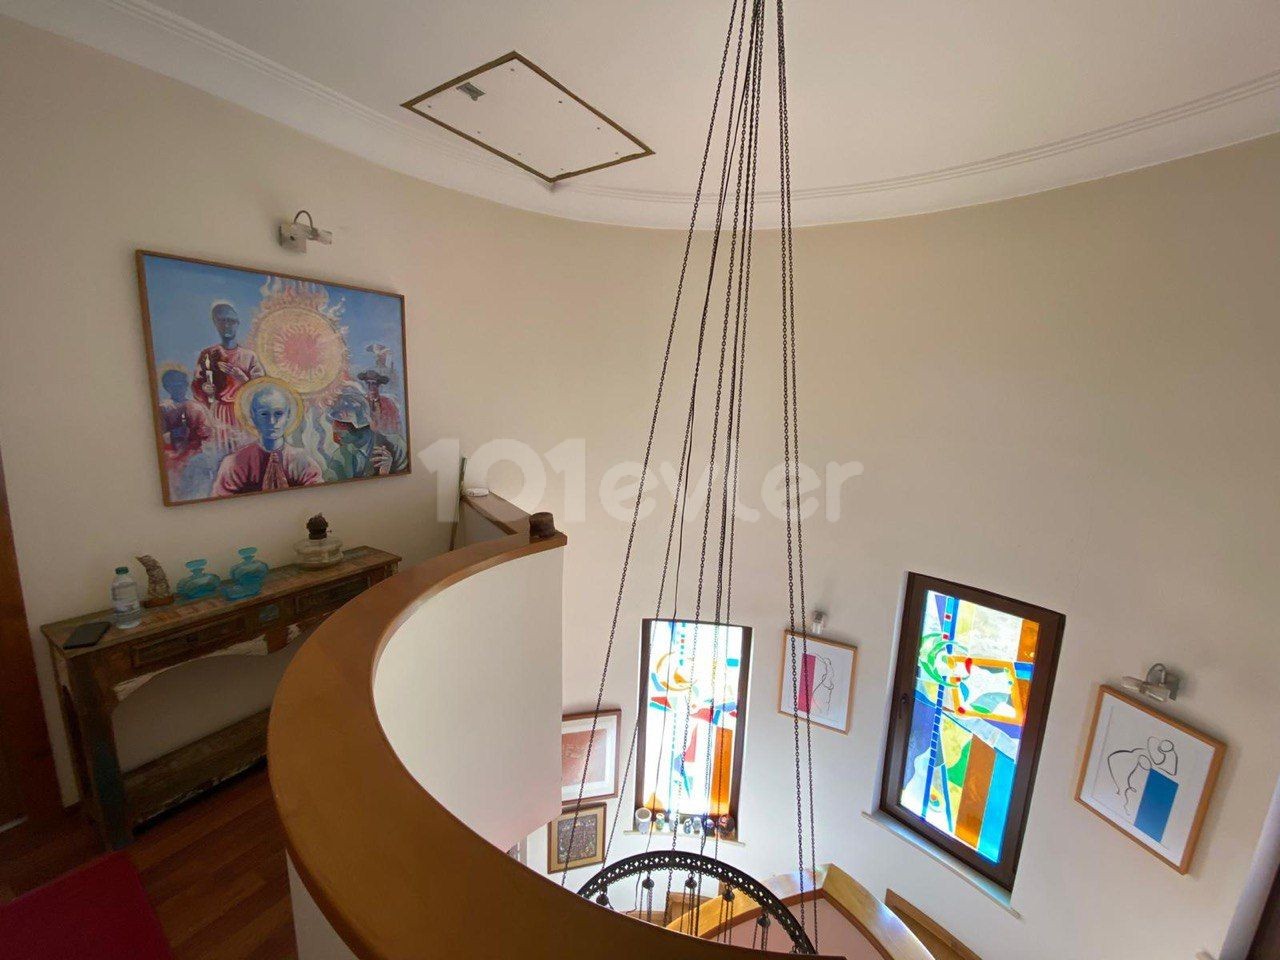 Artist Designed 4 Bedroom Triplex House in Ortakoy, Nicosia, which can be used both as a living space and commercially.